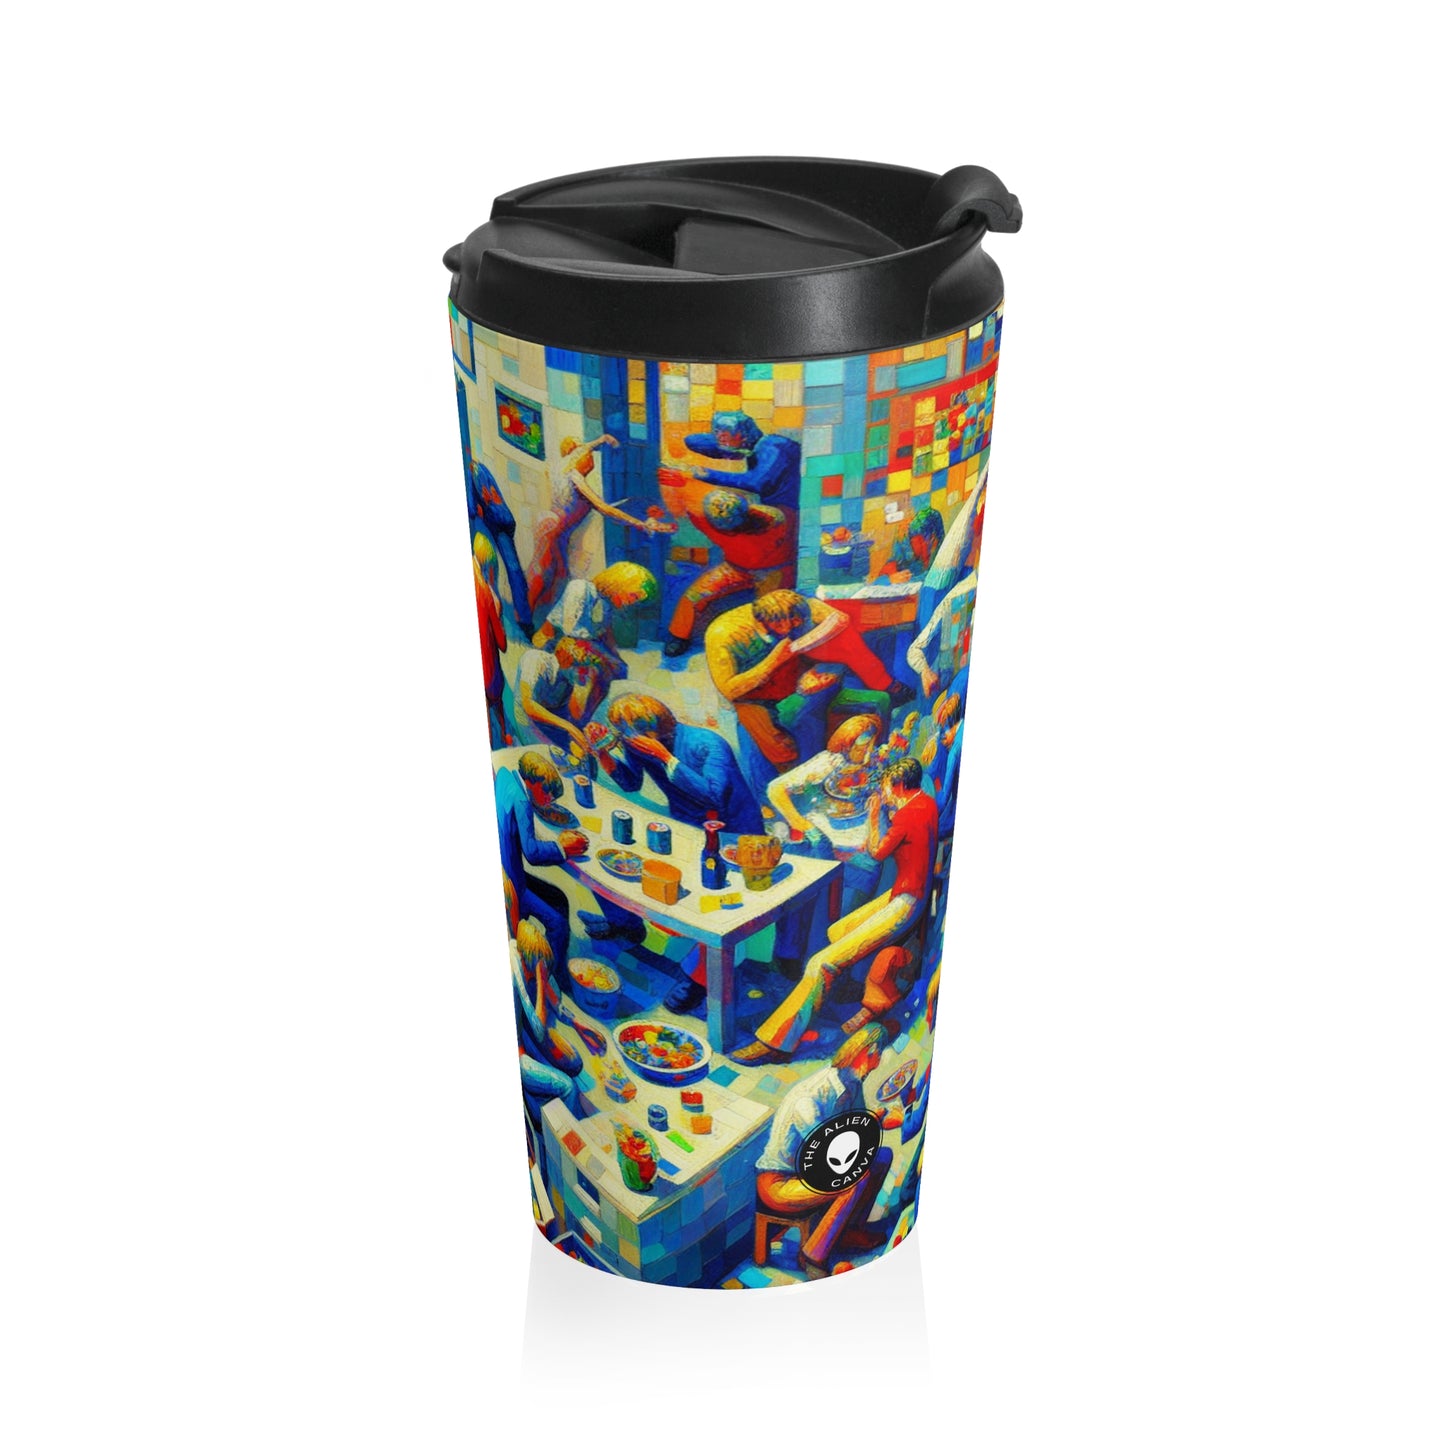 "Subway Soliloquy" - The Alien Stainless Steel Travel Mug Stuckism